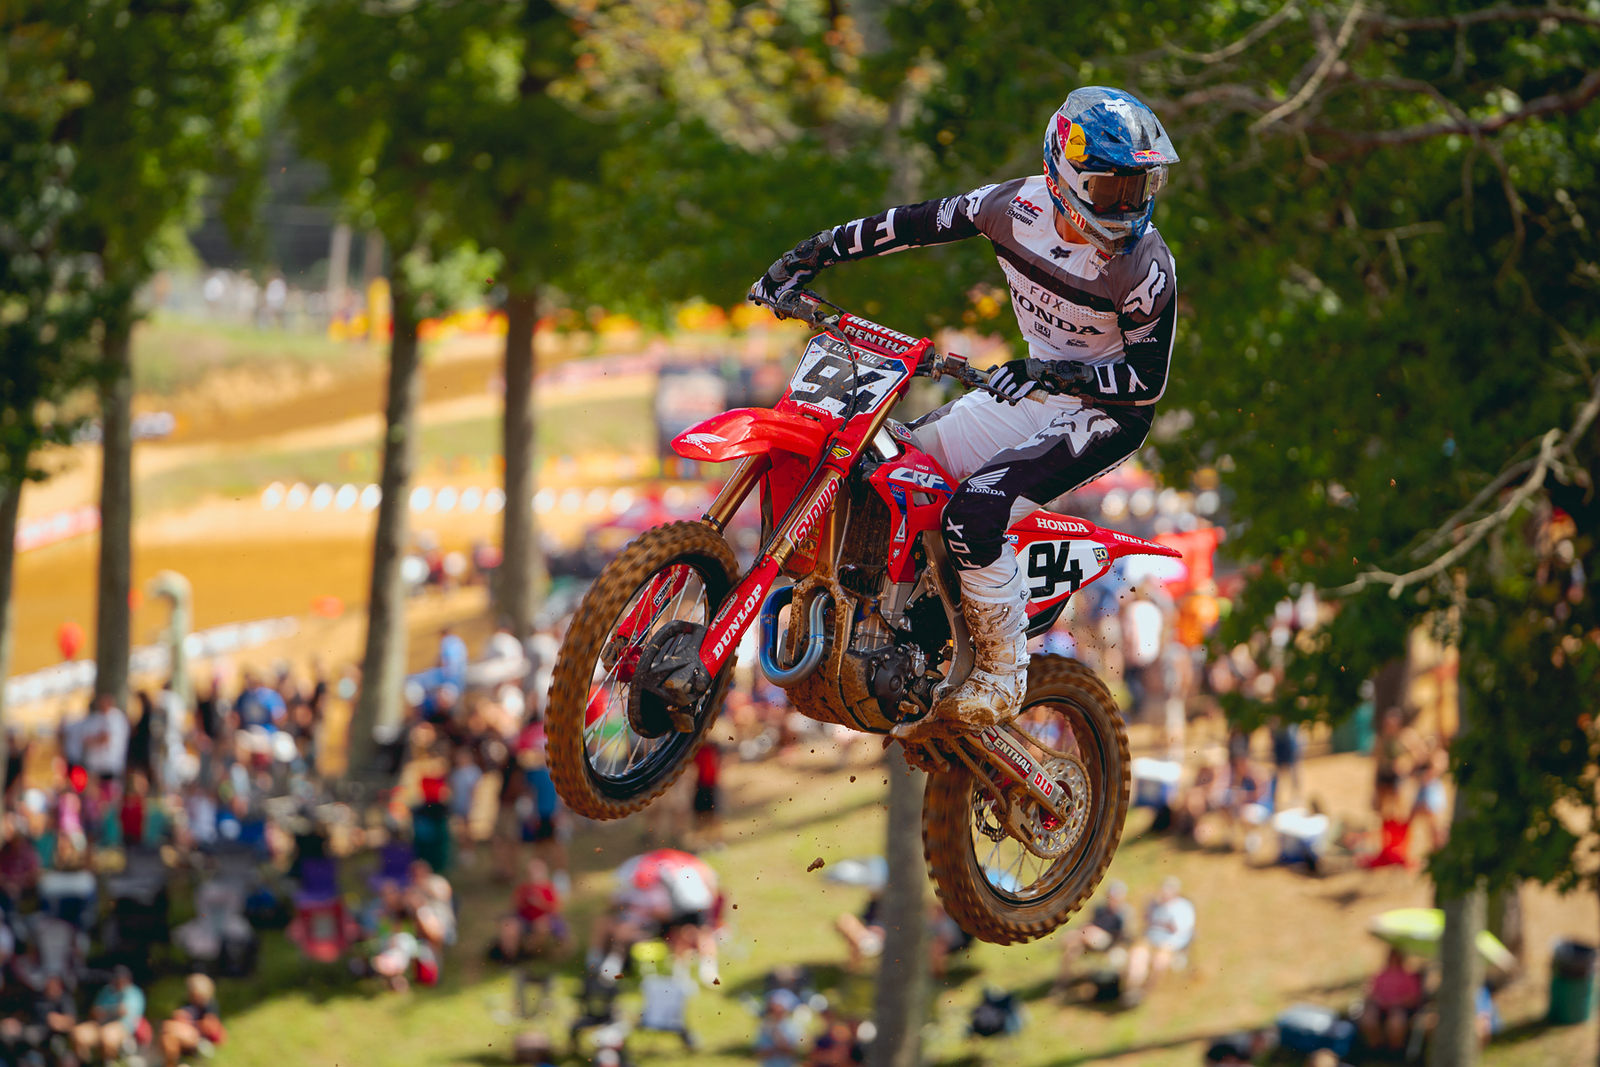 2022 Budds Creek Motocross Qualifying Report & Results Swapmoto Live